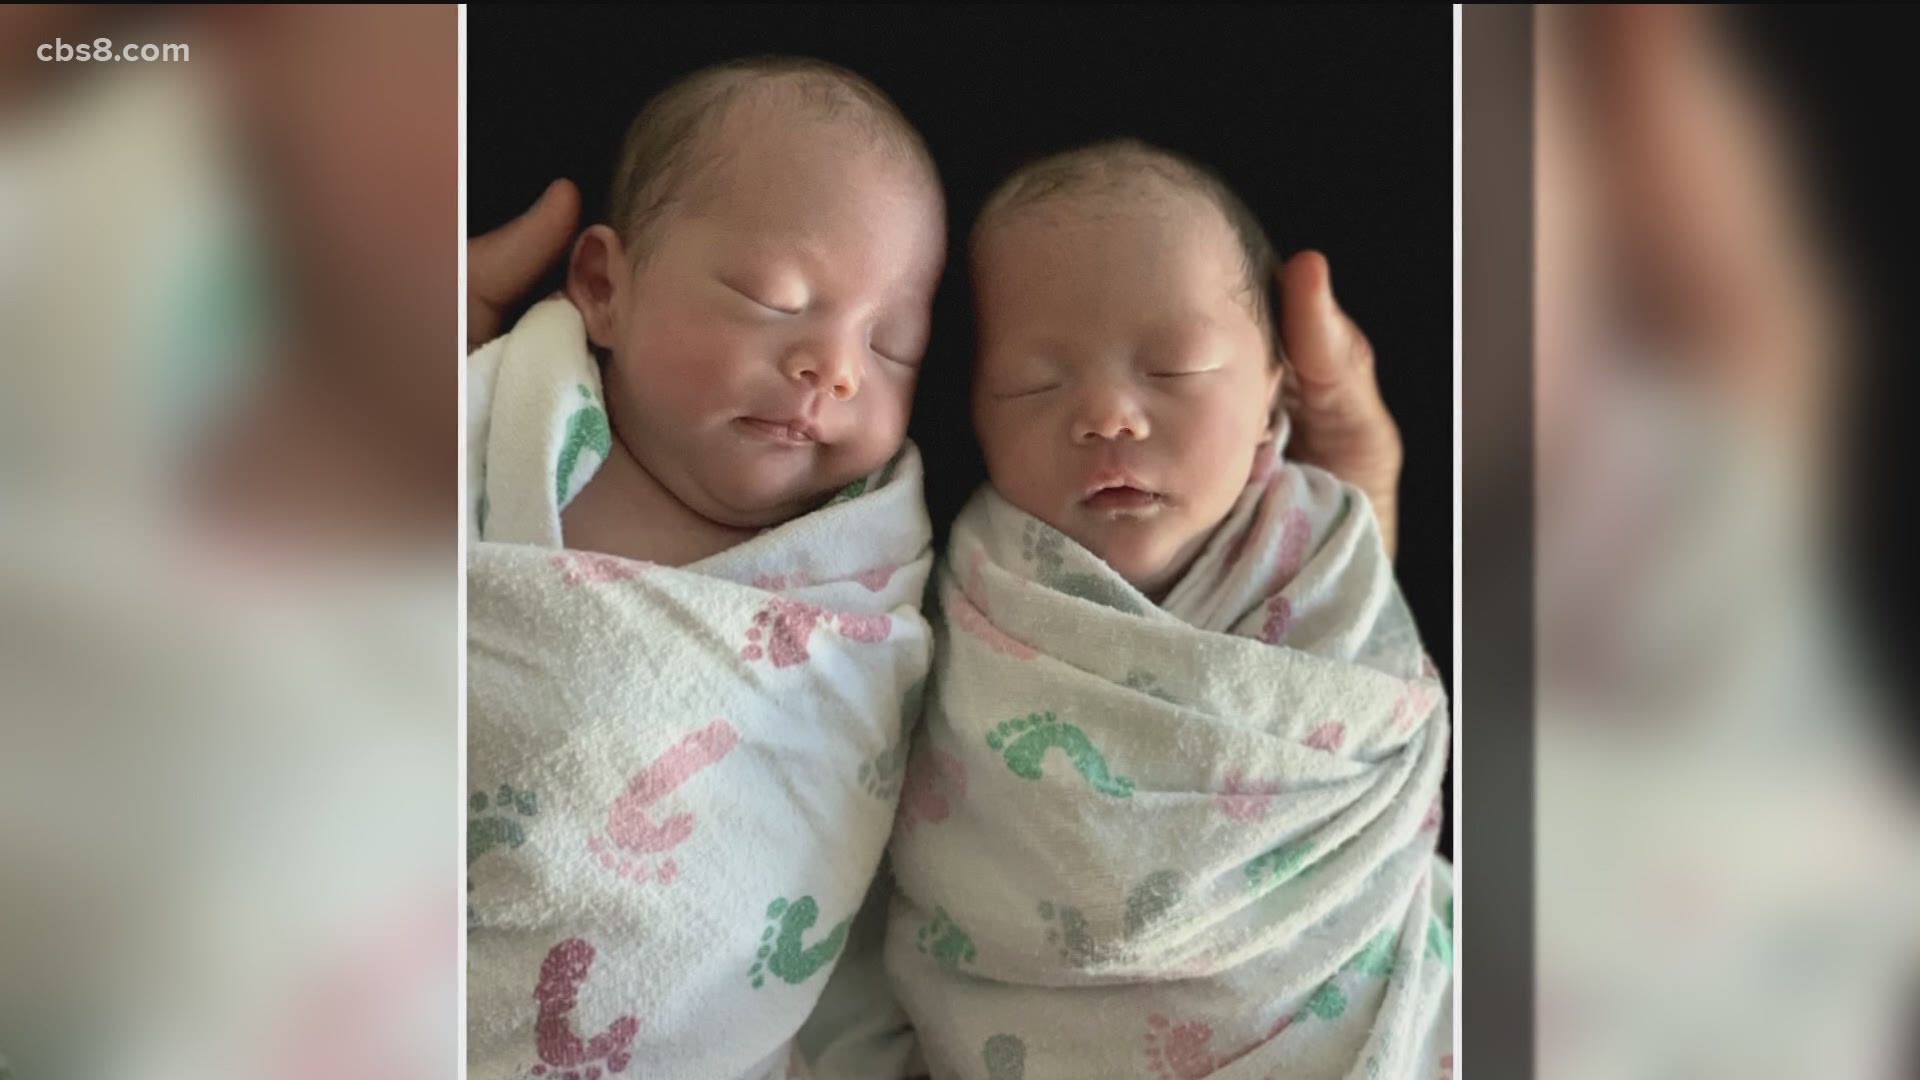 The girls were in the NICU at UCSD for several weeks, but are now healthy.